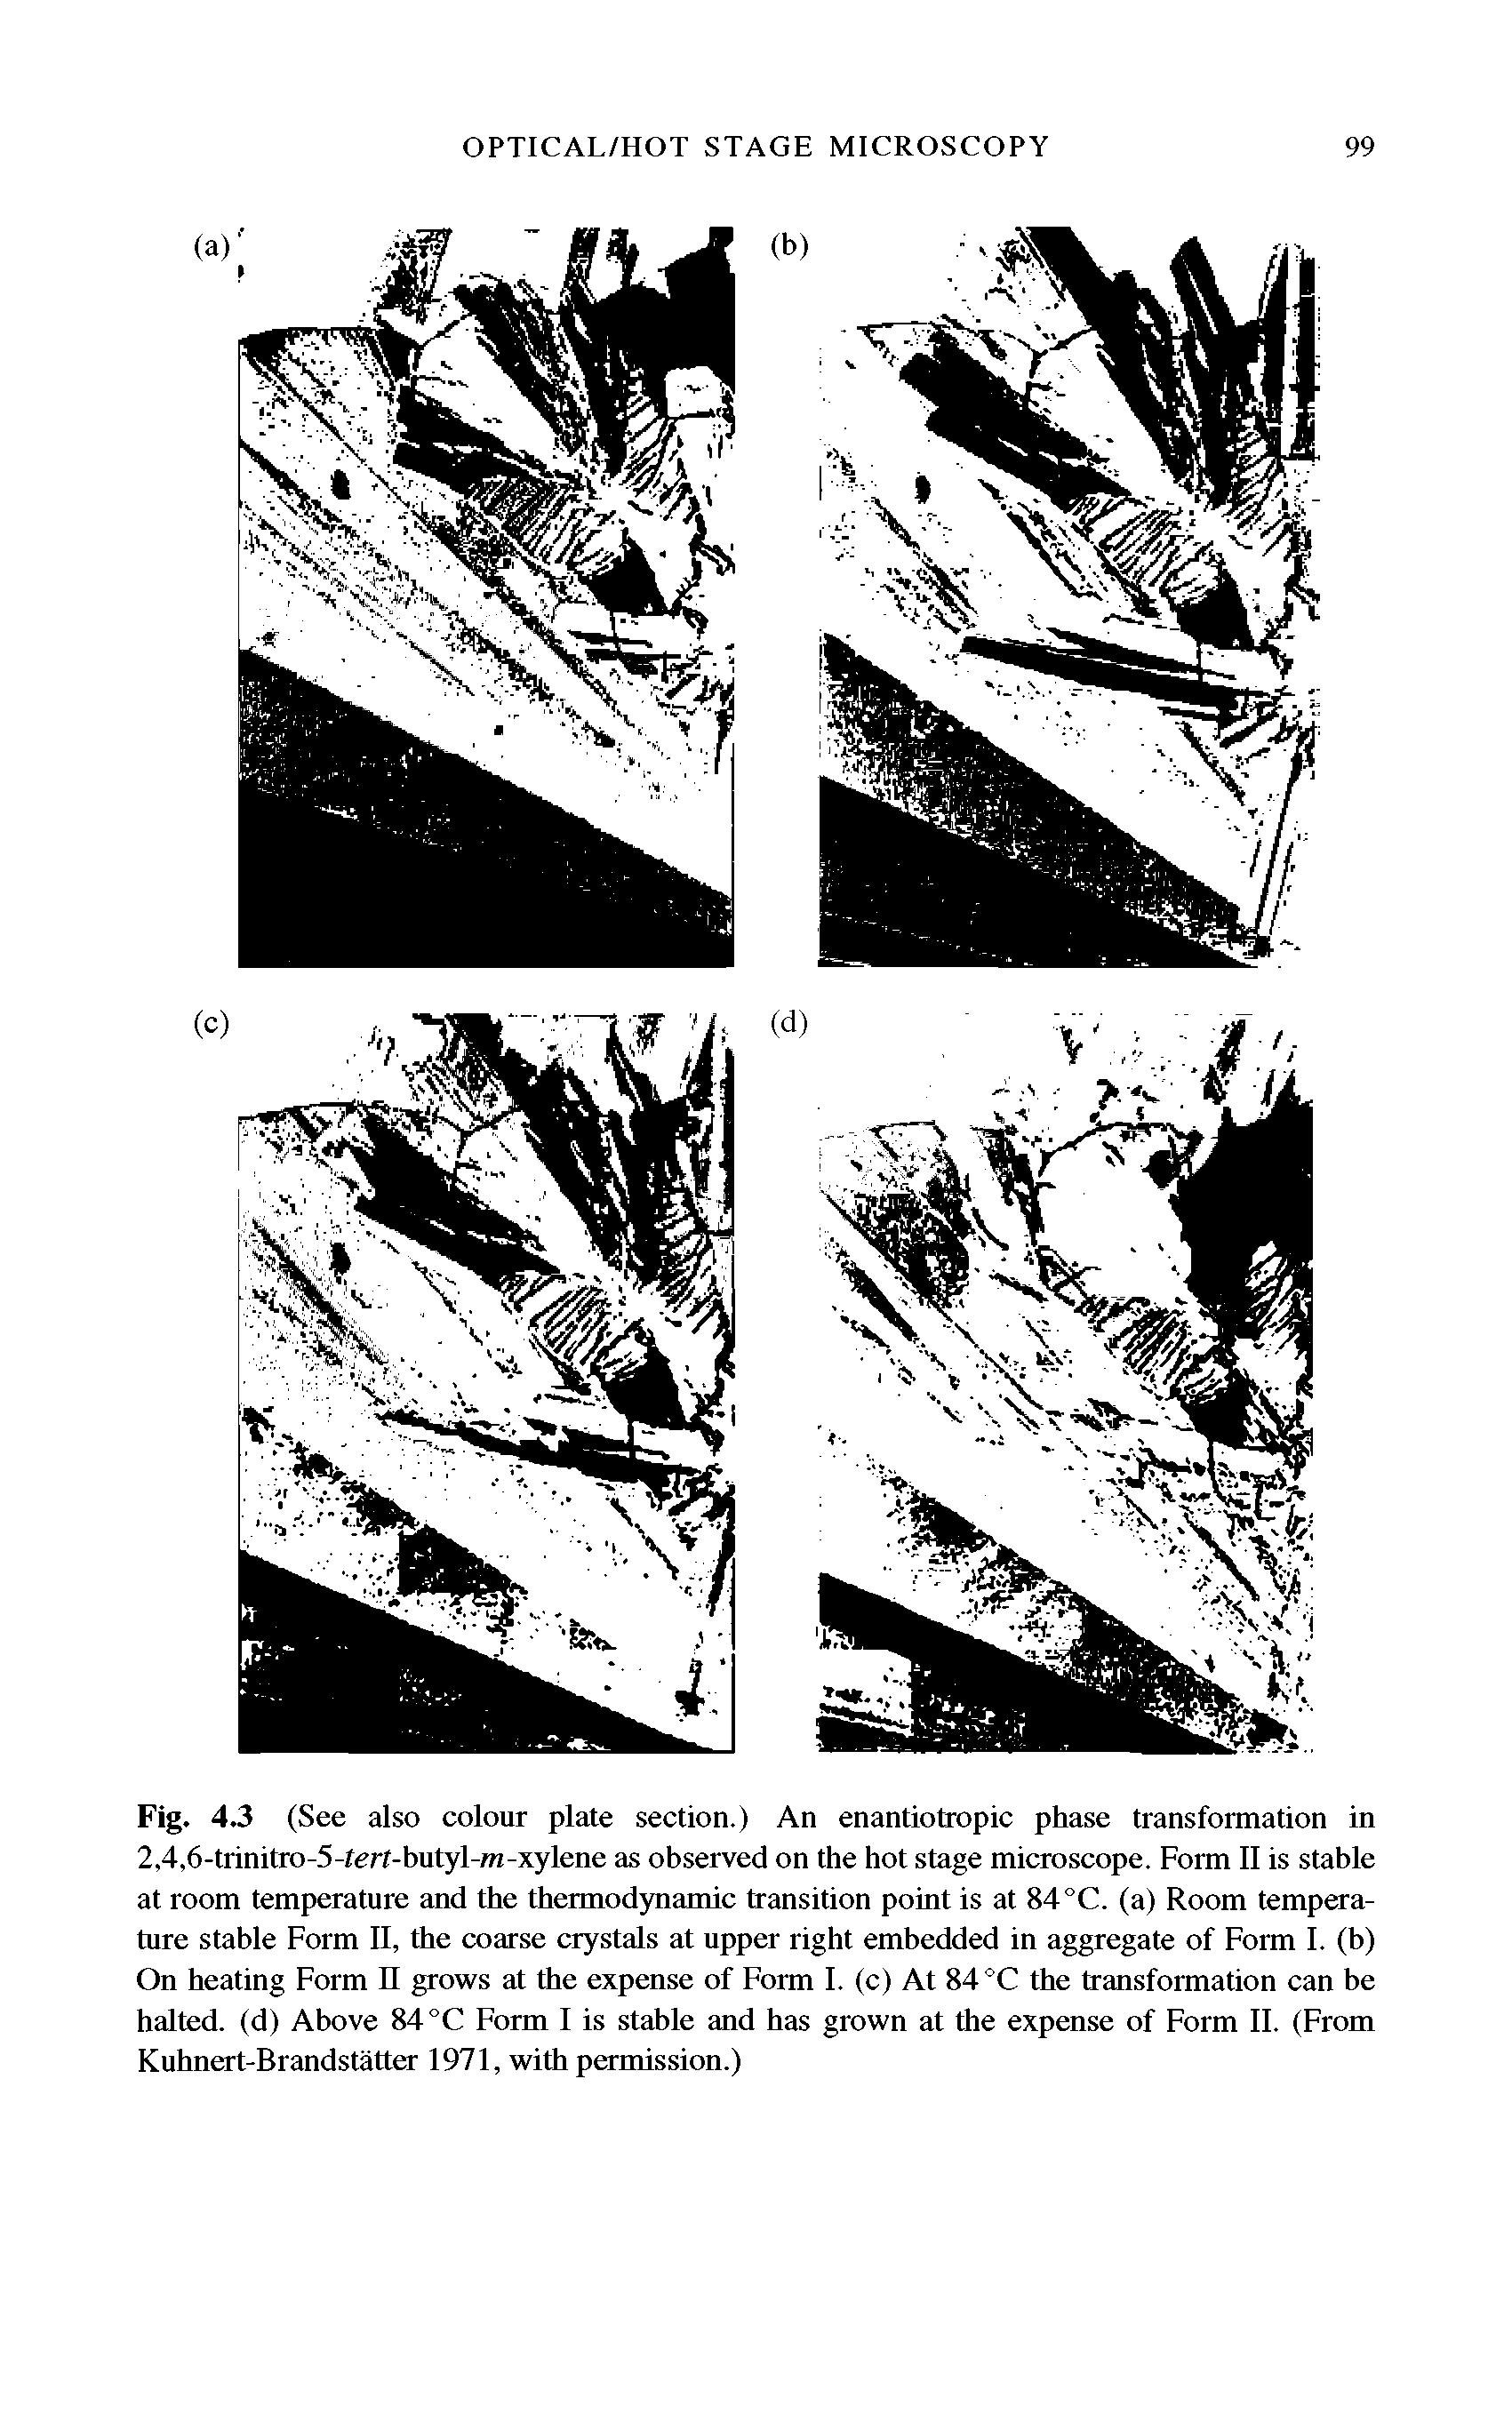 Fig. 4.3 (See also colour plate section.) An enantiotropic phase transformation in 2,4,6-trinitro-5-fert-butyl-ra-xylene as observed on the hot stage microscope. Form 11 is stable at room temperature and the thermodynamic transition point is at 84 °C. (a) Room temperature stable Form 11, the coarse crystals at upper right embedded in aggregate of Form 1. (b) On heating Form n grows at the expense of Form 1. (c) At 84 °C the transformation can be halted, (d) Above 84 °C Form 1 is stable and has grown at the expense of Form 11. (From Kuhnert-Brandstatter 1971, with permission.)...